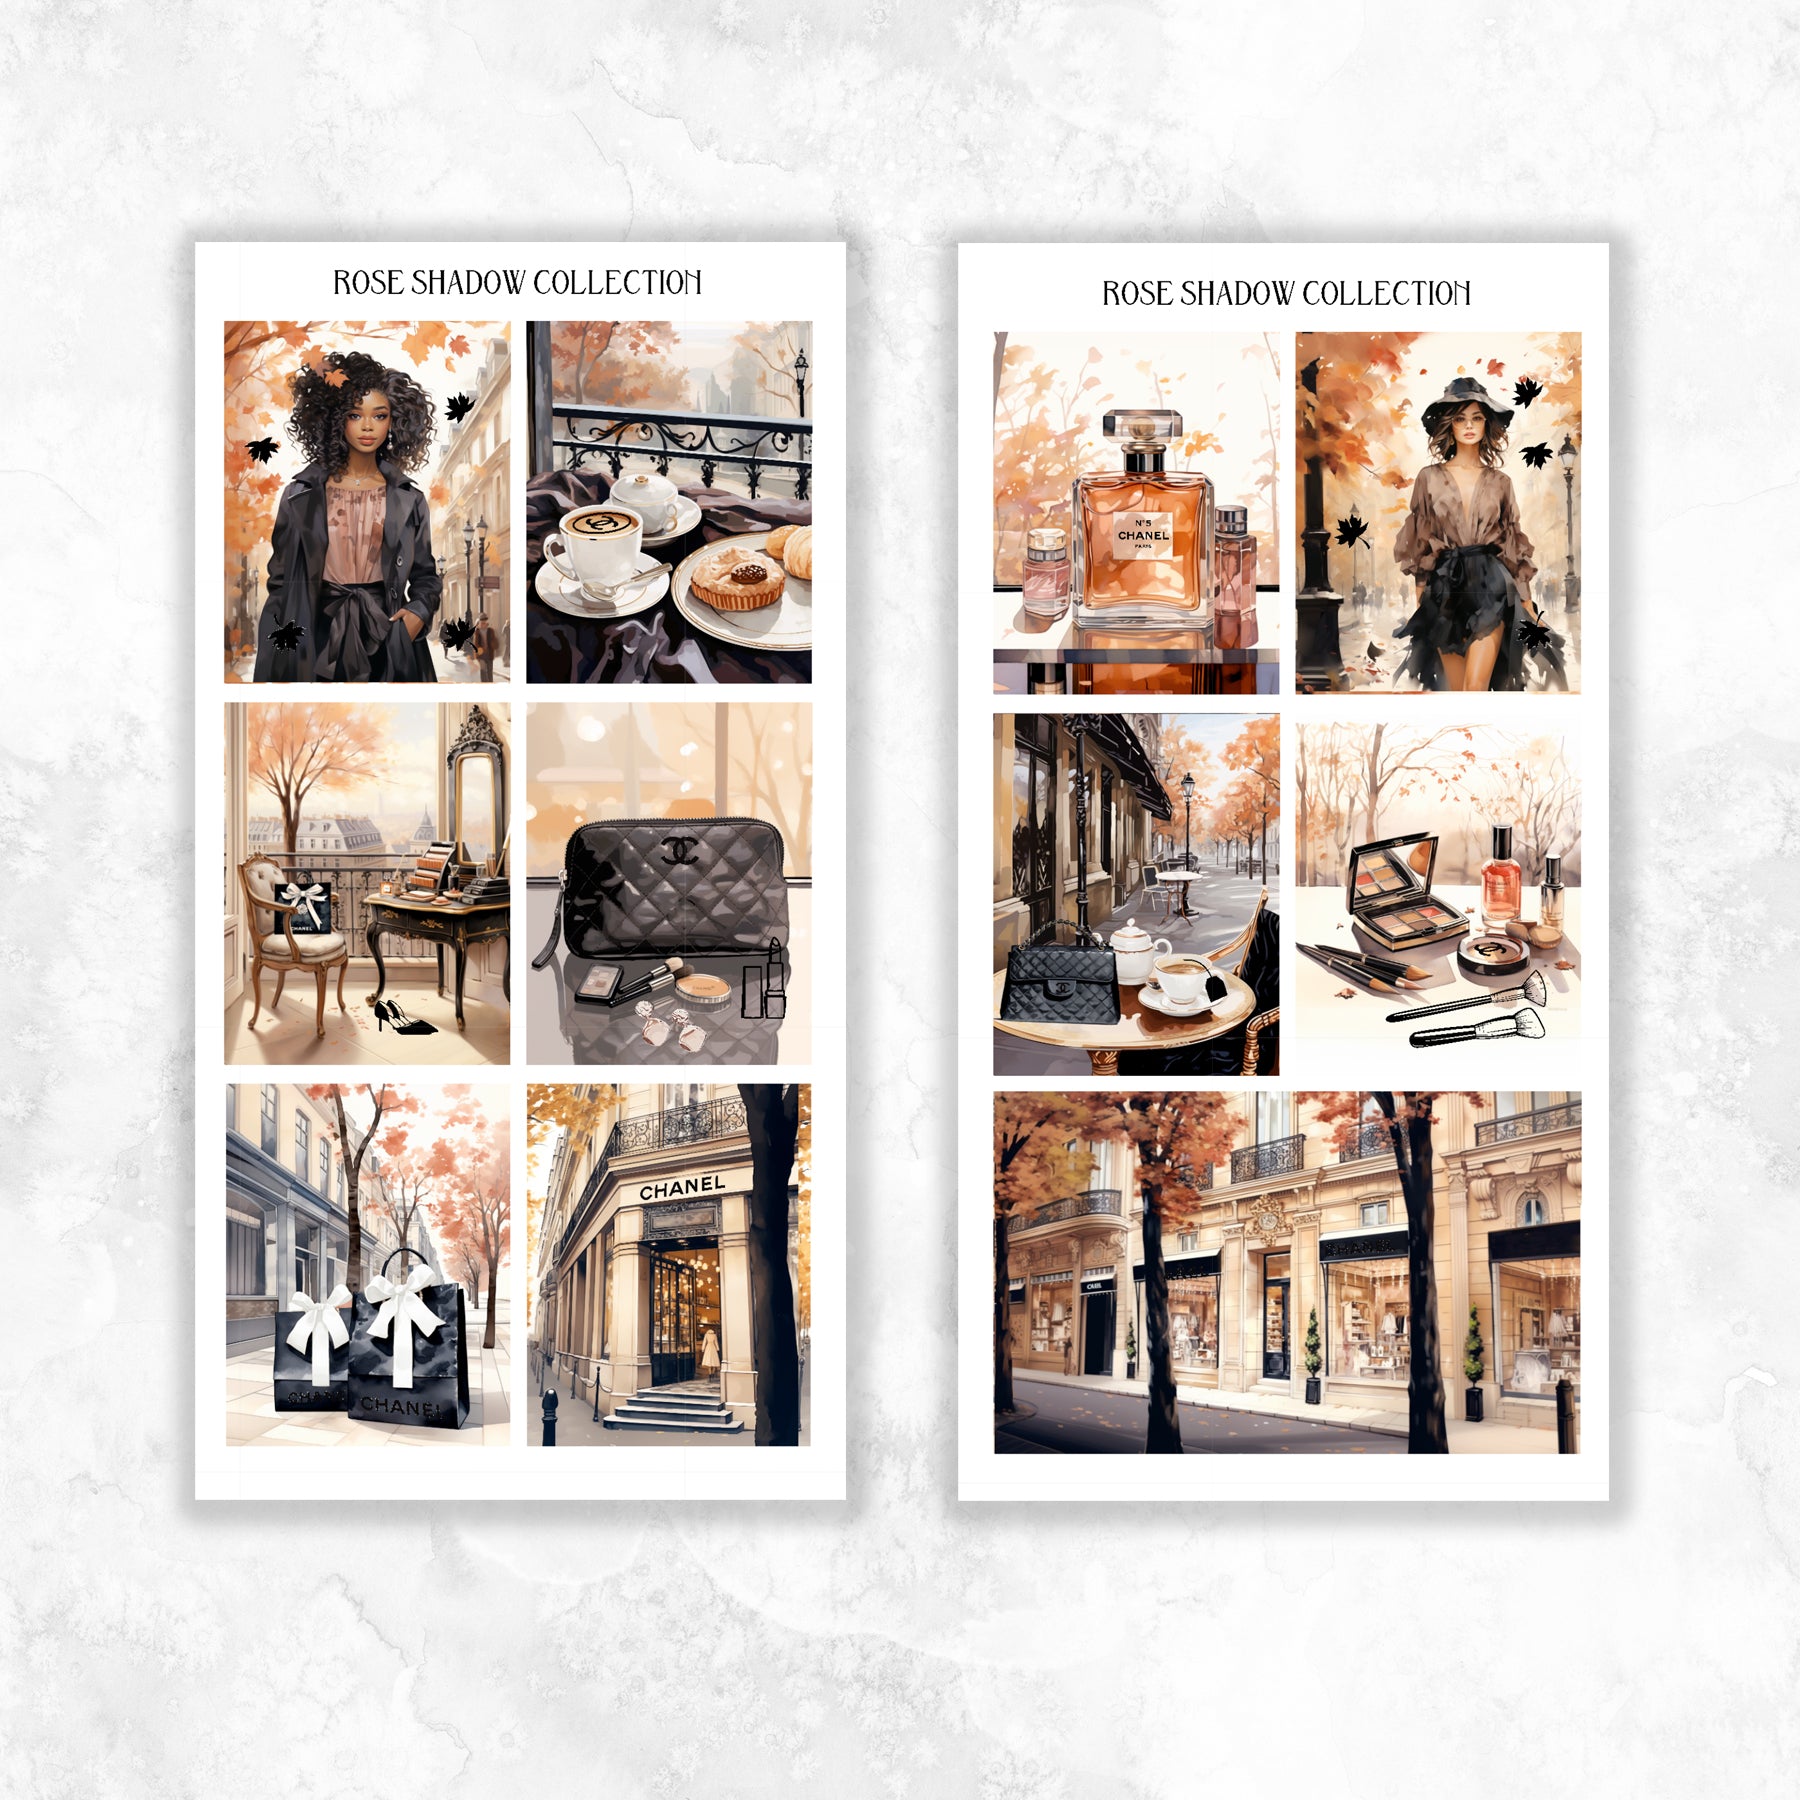 Chanel Fall Exclusive Fashion Sticker Book (VOL 14) – Rose Shadow Collection